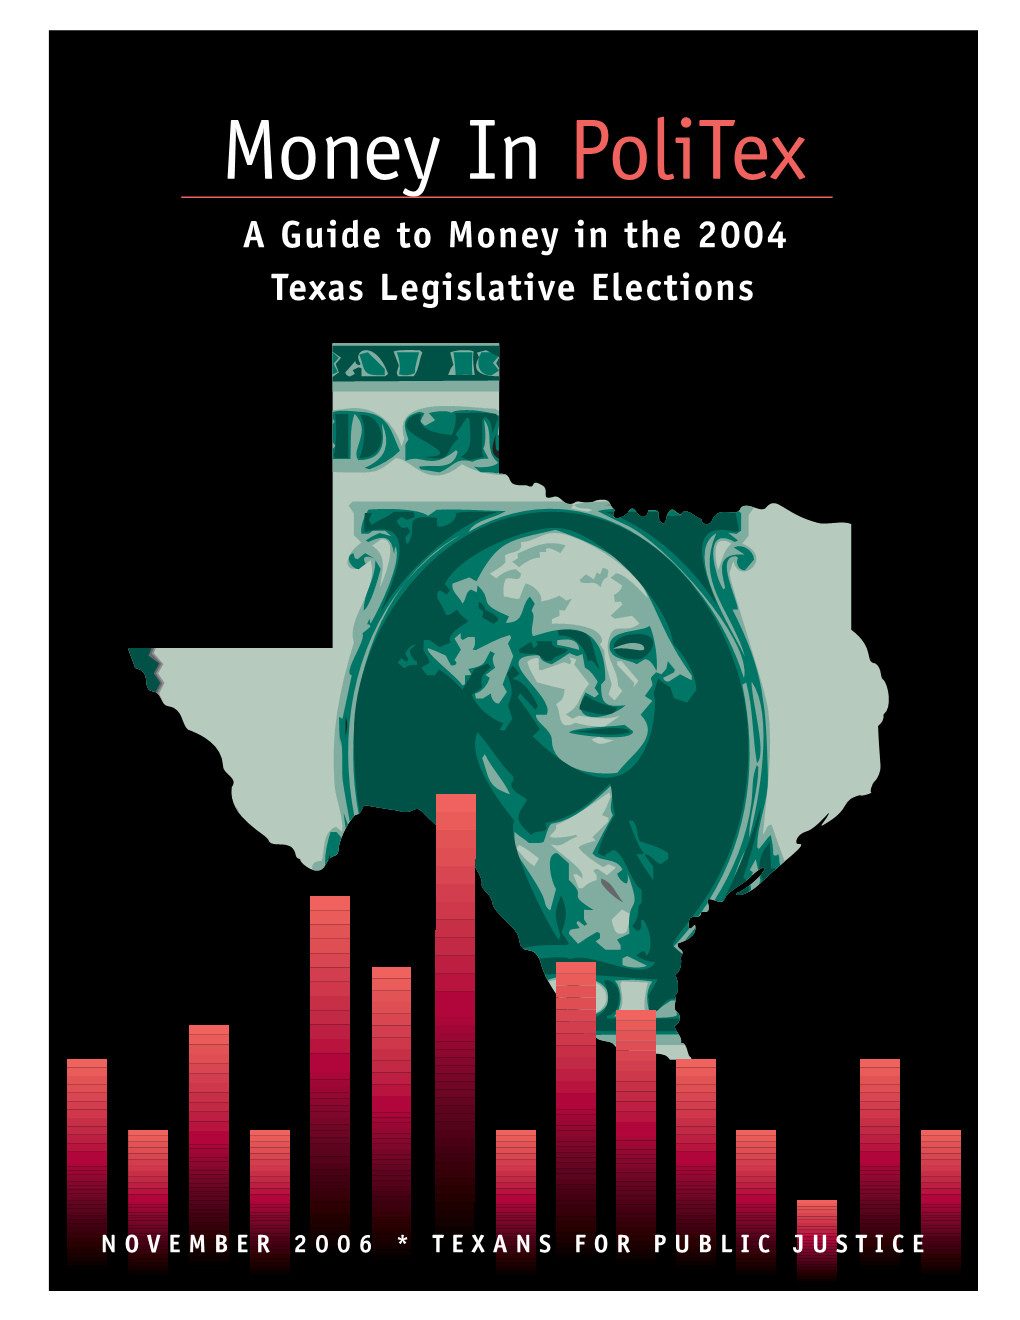 Money in Politex a Guide to Money in the 2004 Texas Legislative Elections